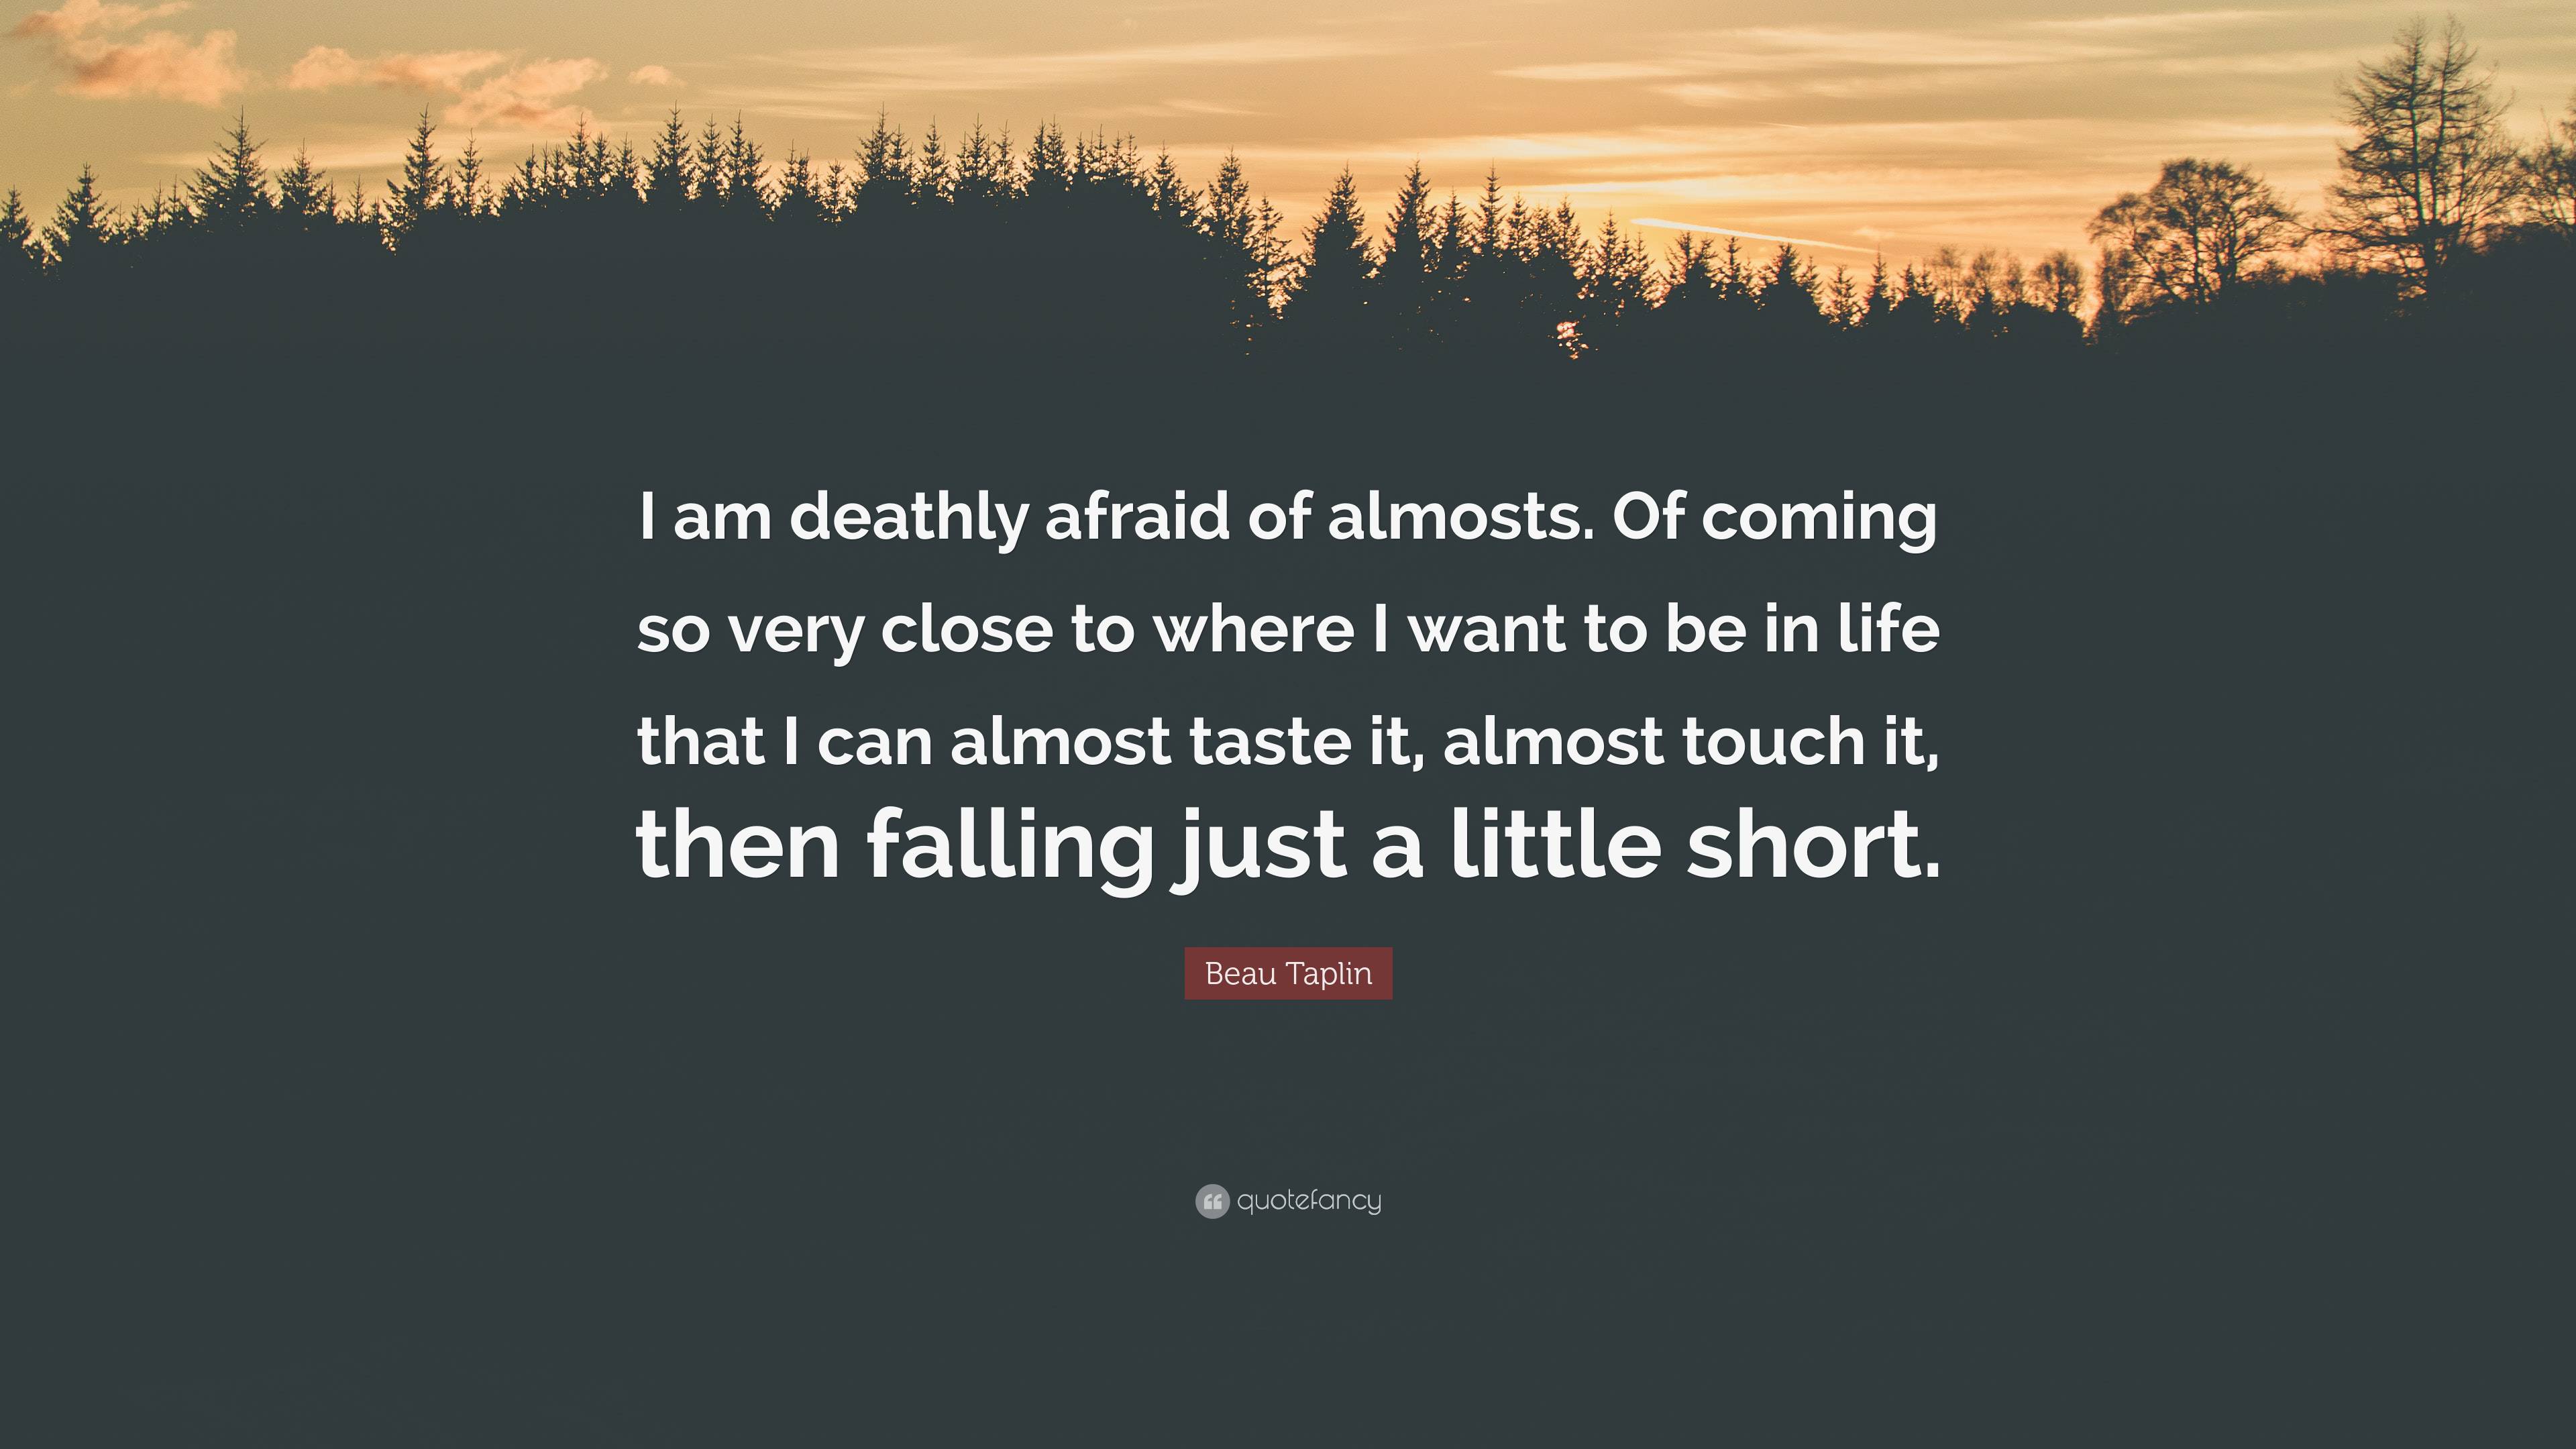 Beau Taplin Quote “i Am Deathly Afraid Of Almosts Of Coming So Very Close To Where I Want To